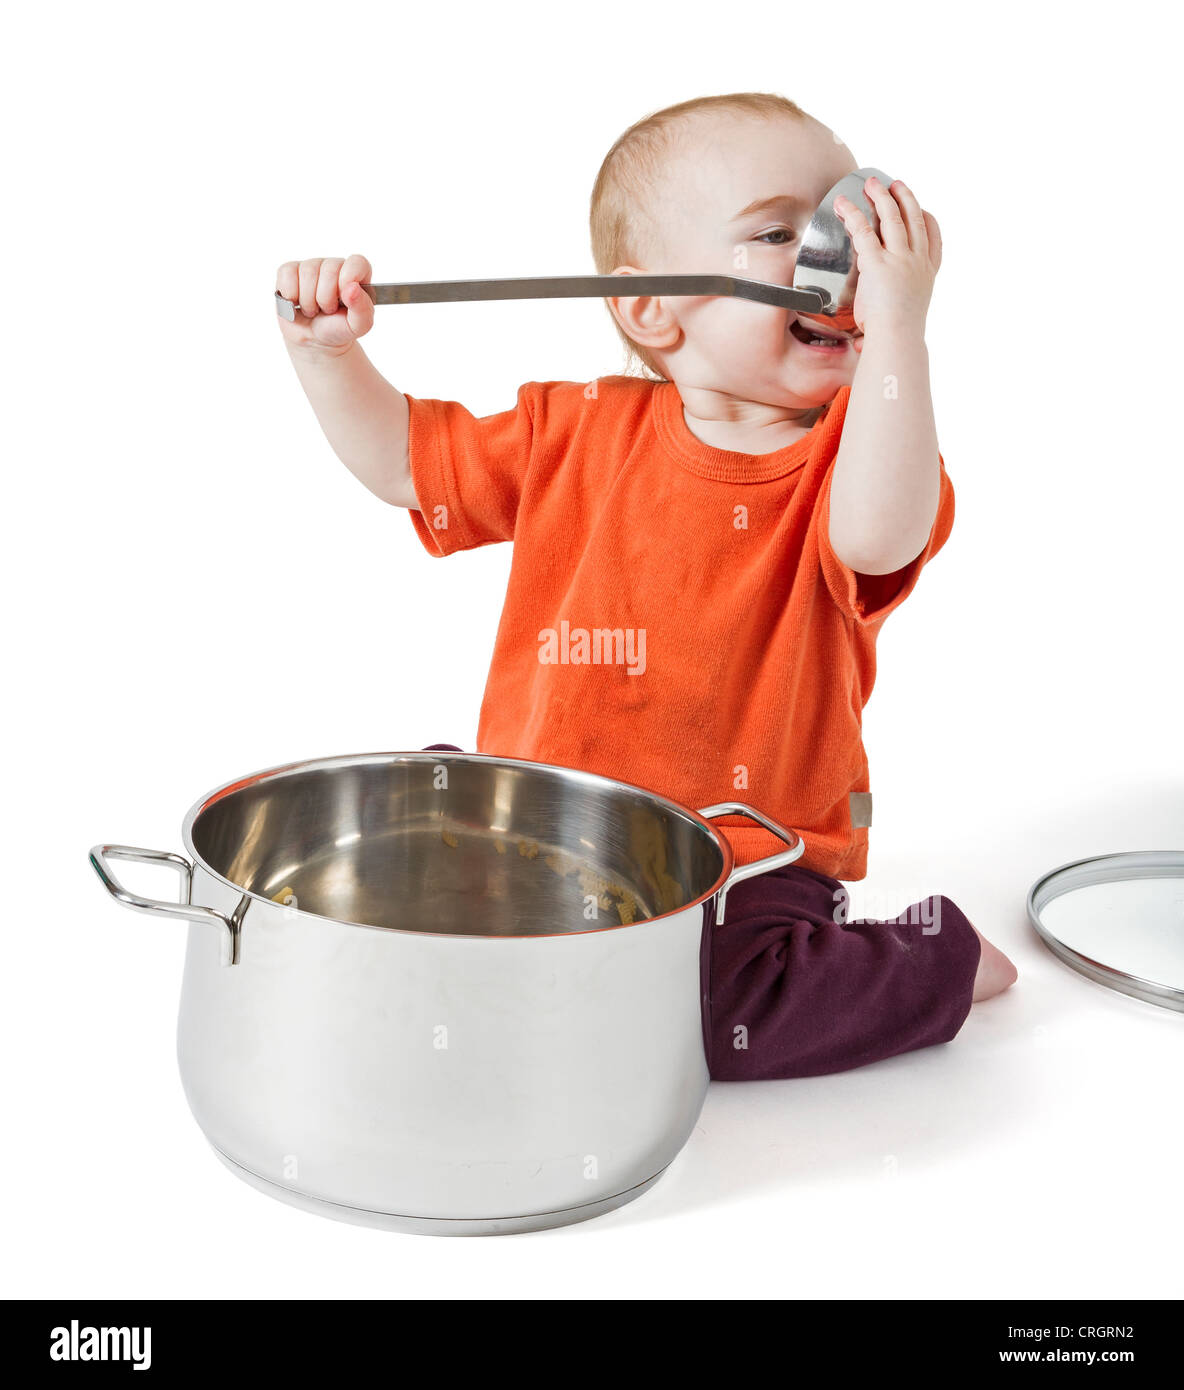 https://c8.alamy.com/comp/CRGRN2/baby-with-big-cooking-pot-isolated-on-white-background-CRGRN2.jpg